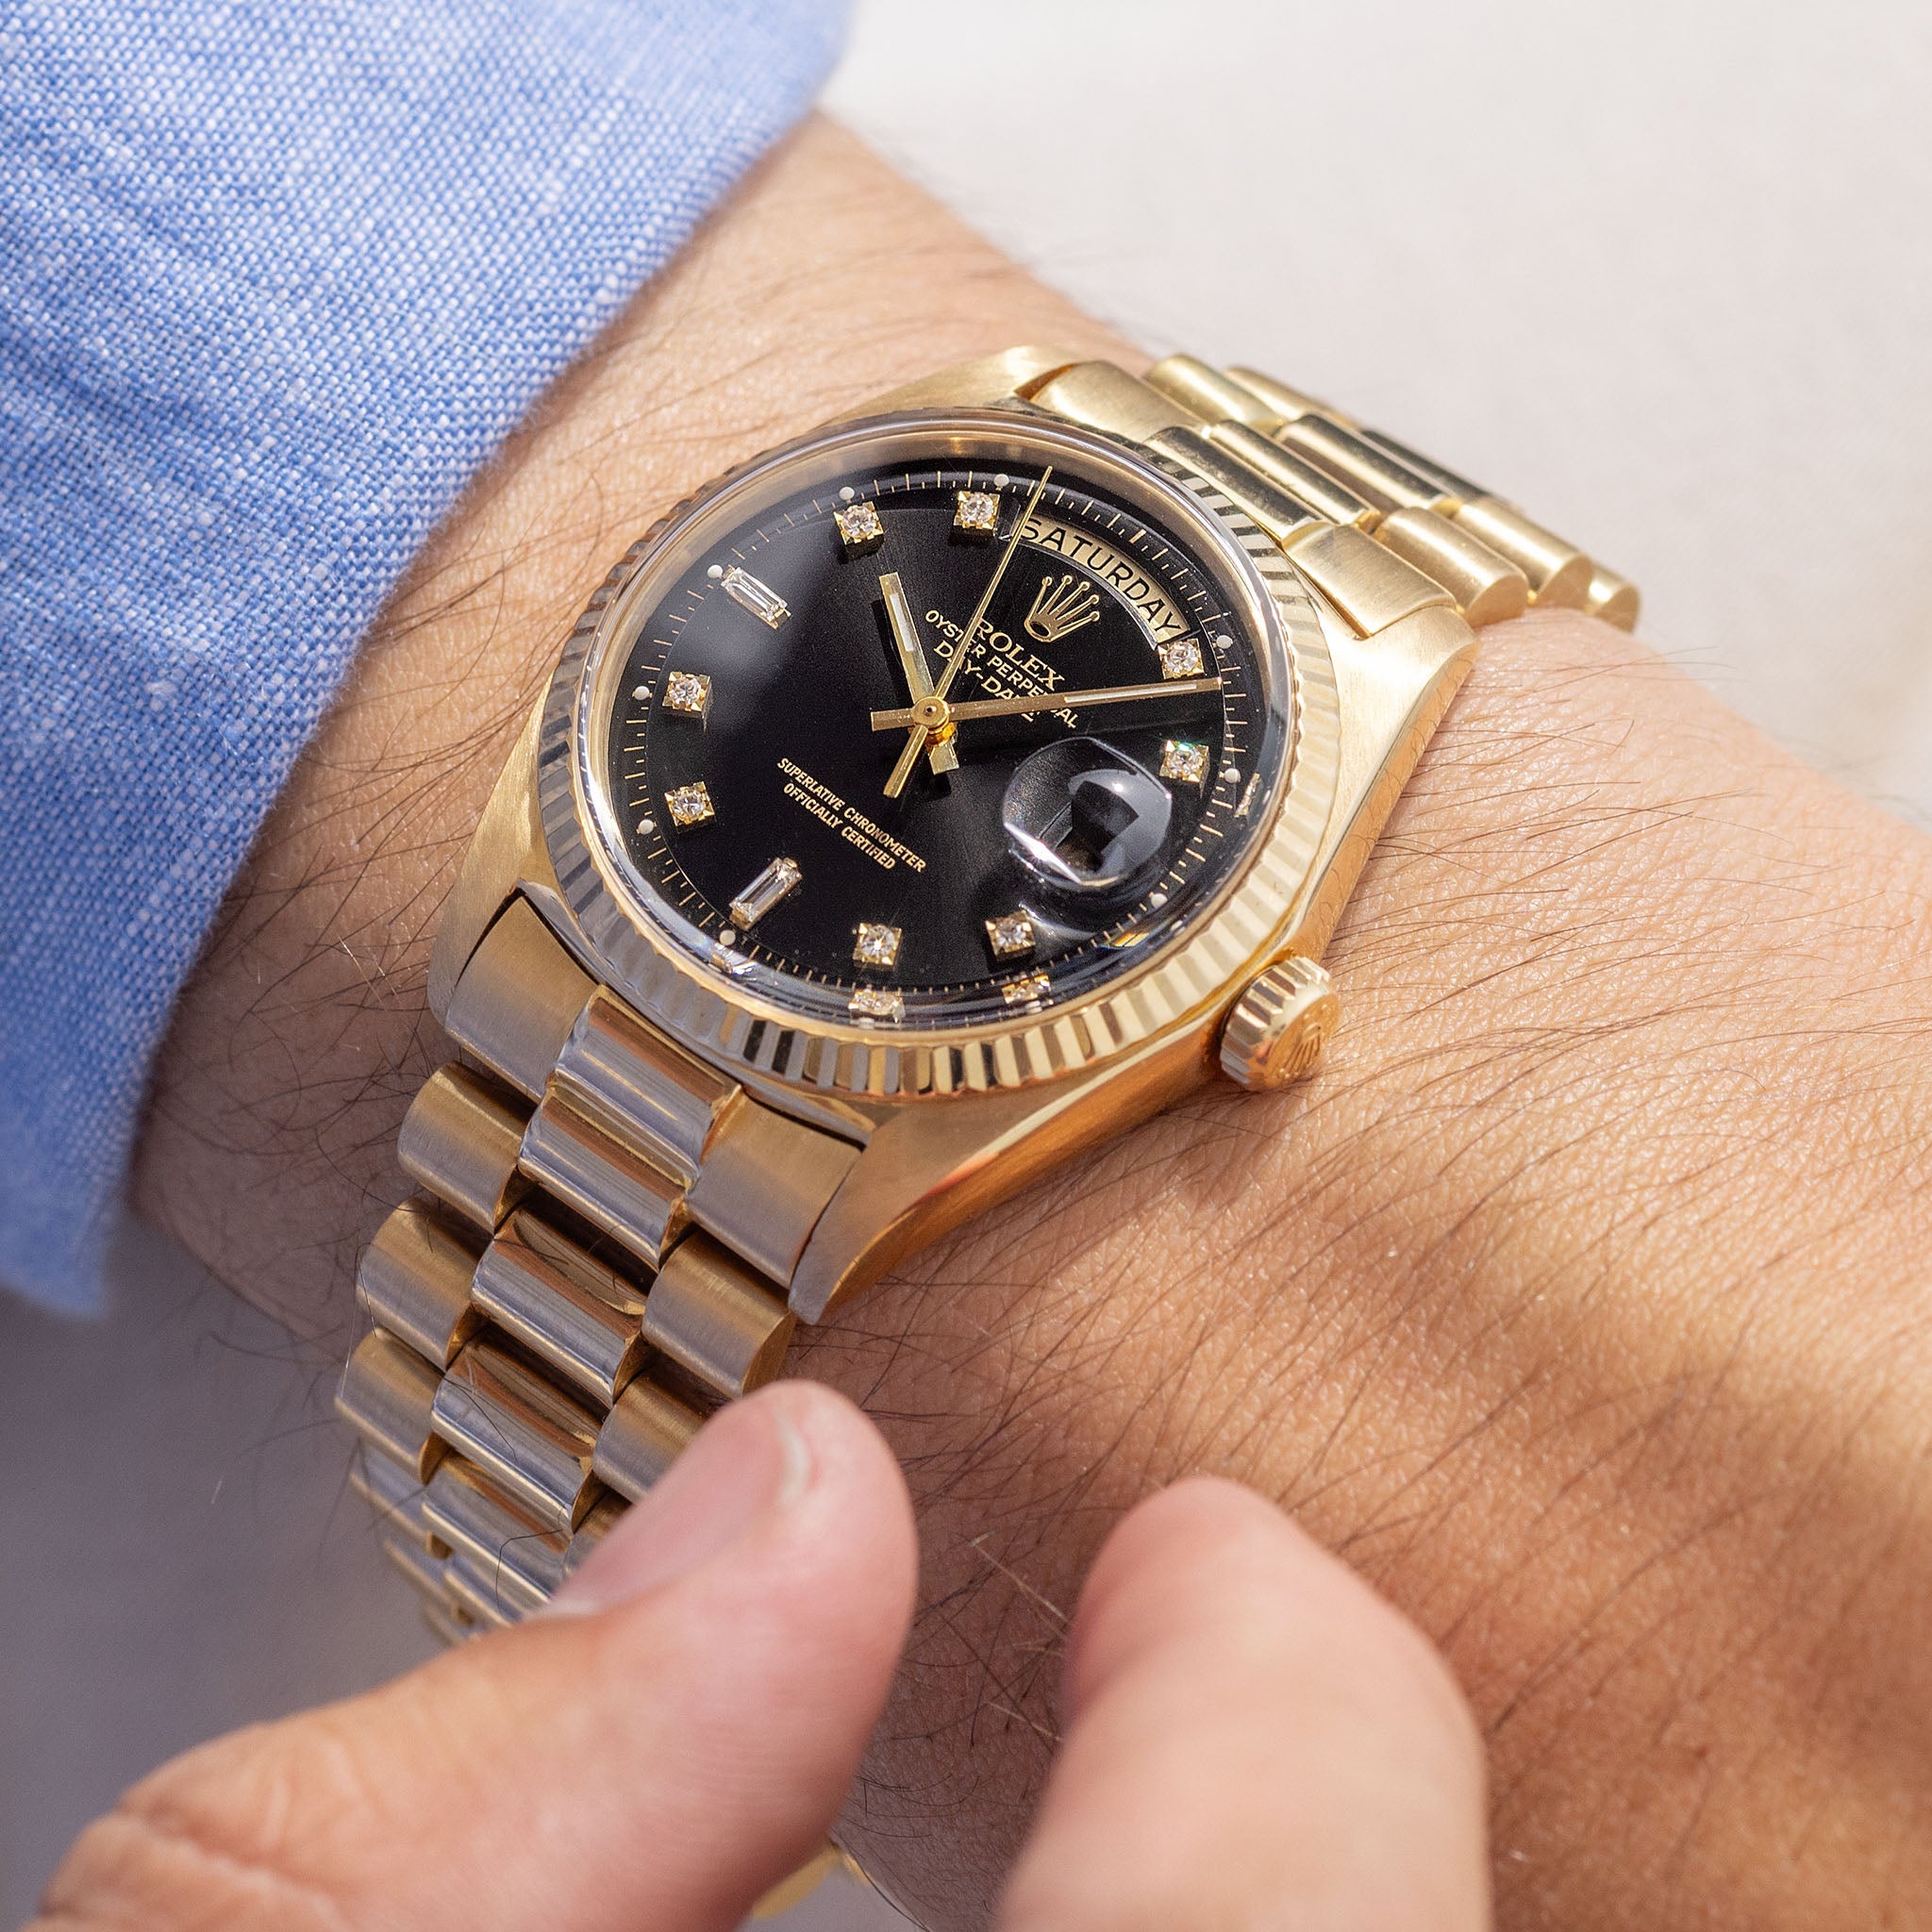 Rolex Day-Date Yellow Gold Black Diamond Hours Dial ref 1803